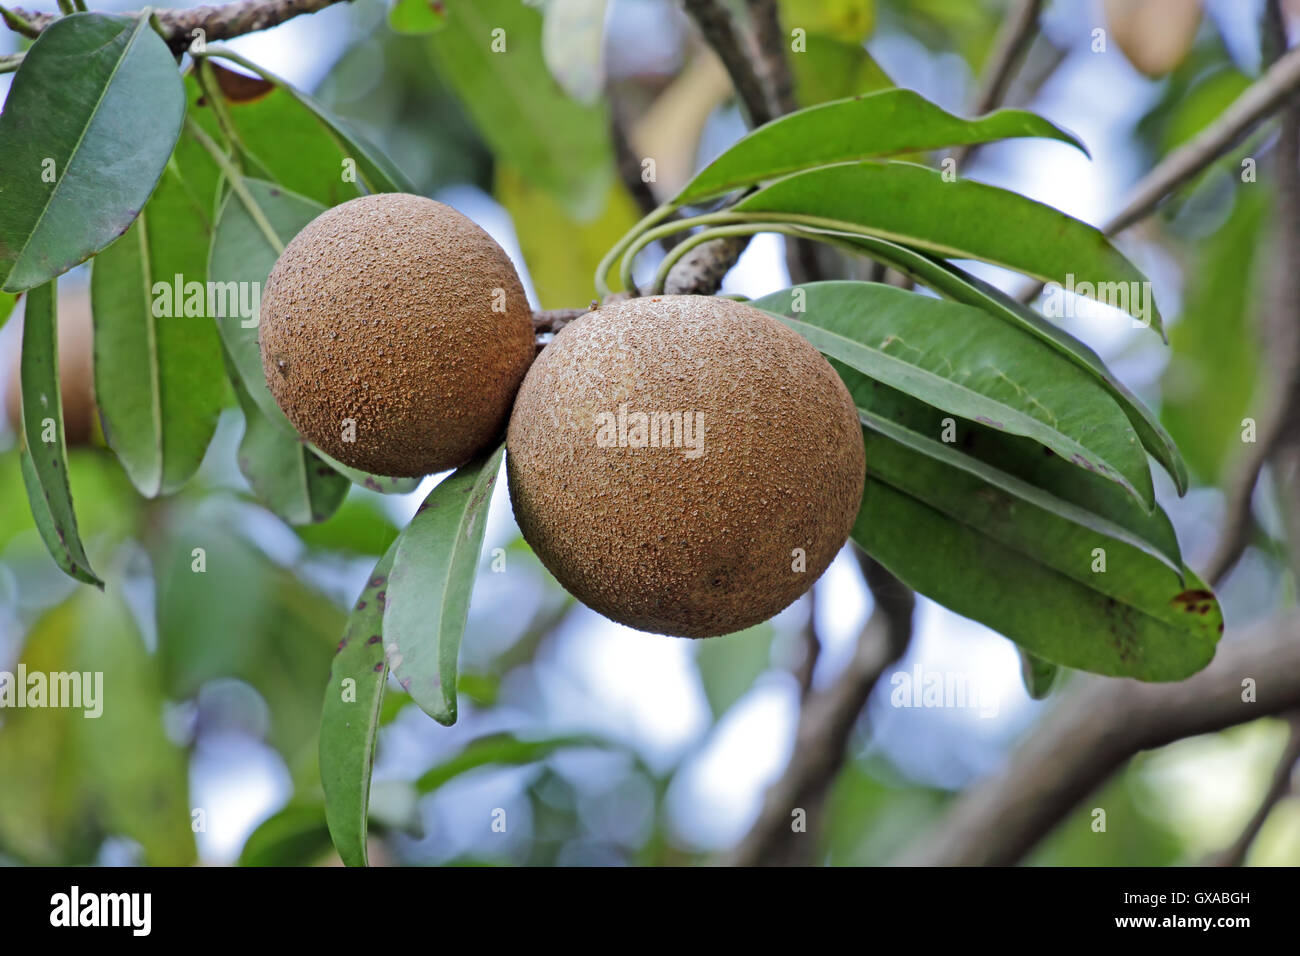 Ripening sapodilla, sapota, fruits, a tropical, evergreen tree fruit (berry) with exceptionally sweet and malty flavor. Stock Photo